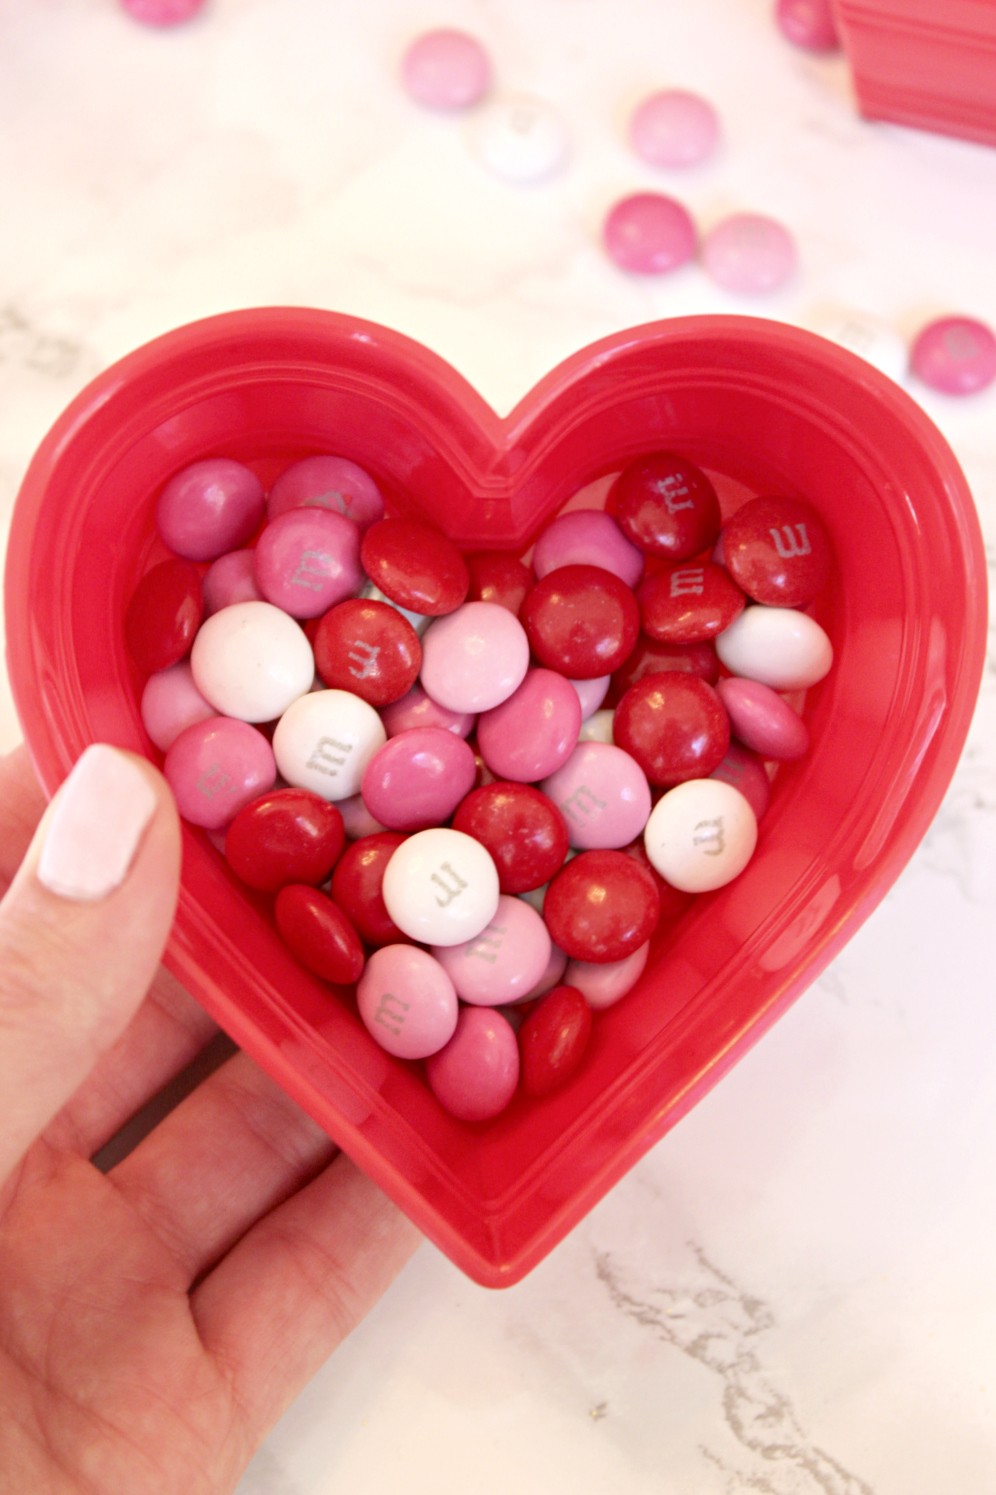 Edible gifts, like MY M&MS, are the best gifts, especially on Valentine's Day | Edible Gifts are the Best Gifts: Valentine's Day My M&Ms by blogger Stephanie Ziajka from Diary of a Debutante